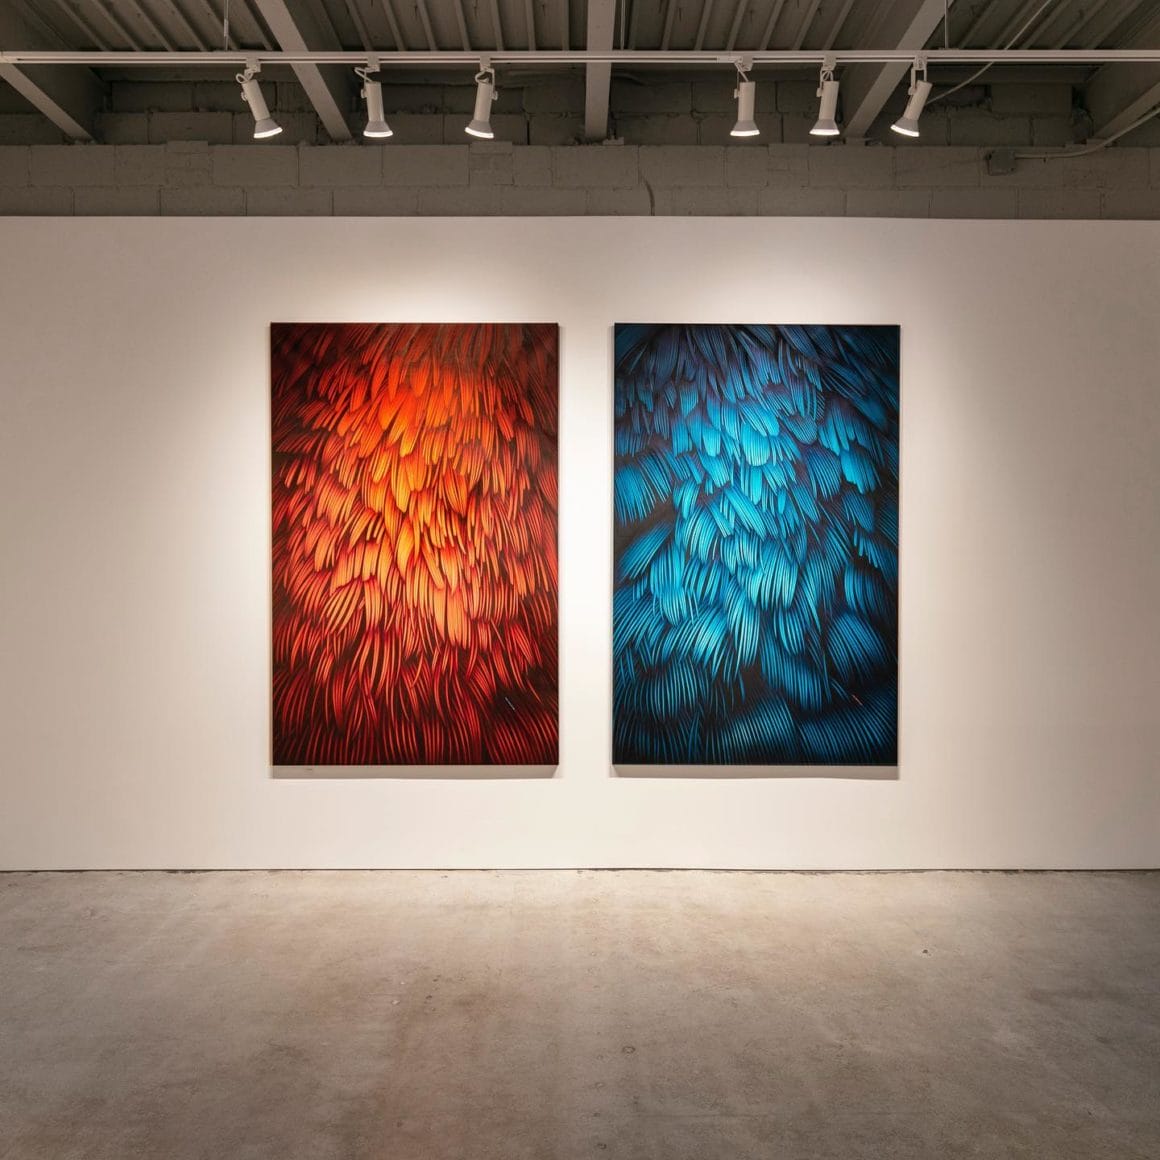 two works by Adèle exhibited in a gallery.  One represents orange feathers and the other blue feathers